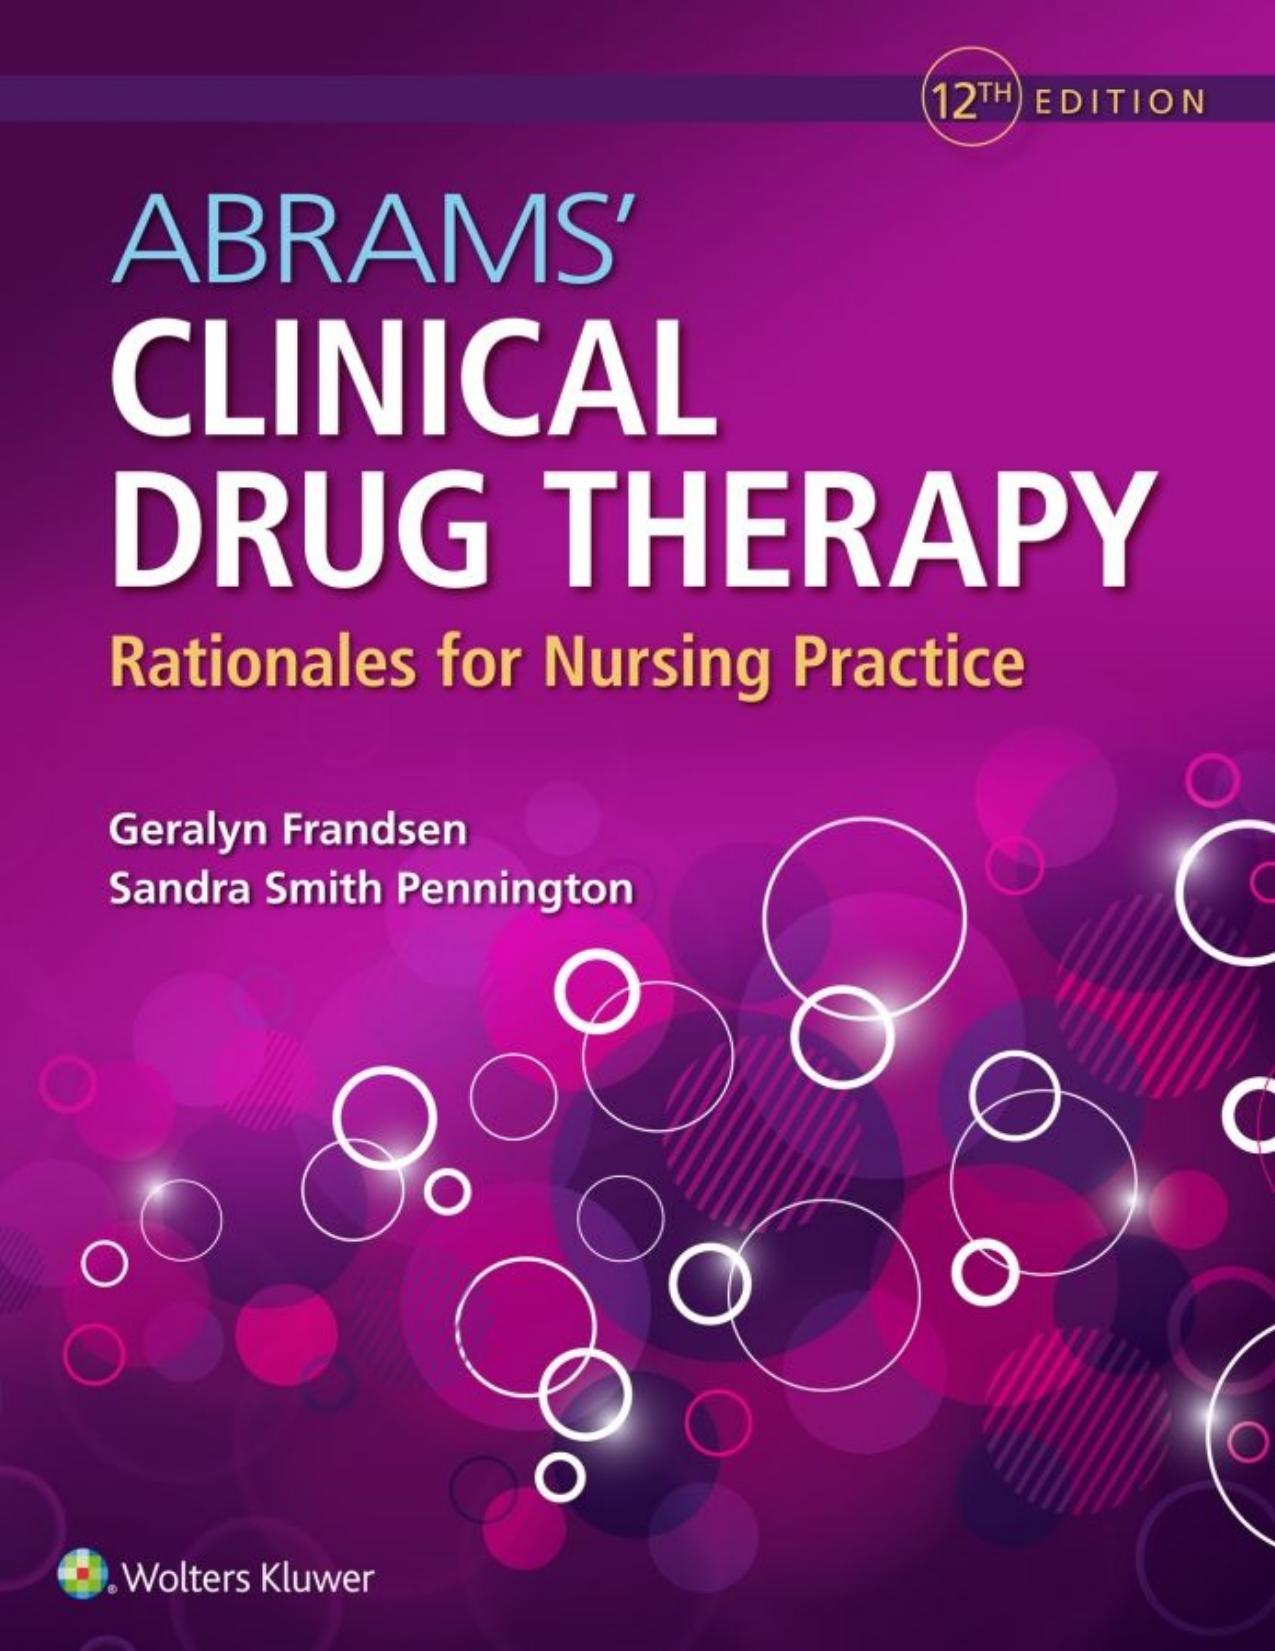 ABRAMS’ CLINICAL DRUG THERAPY